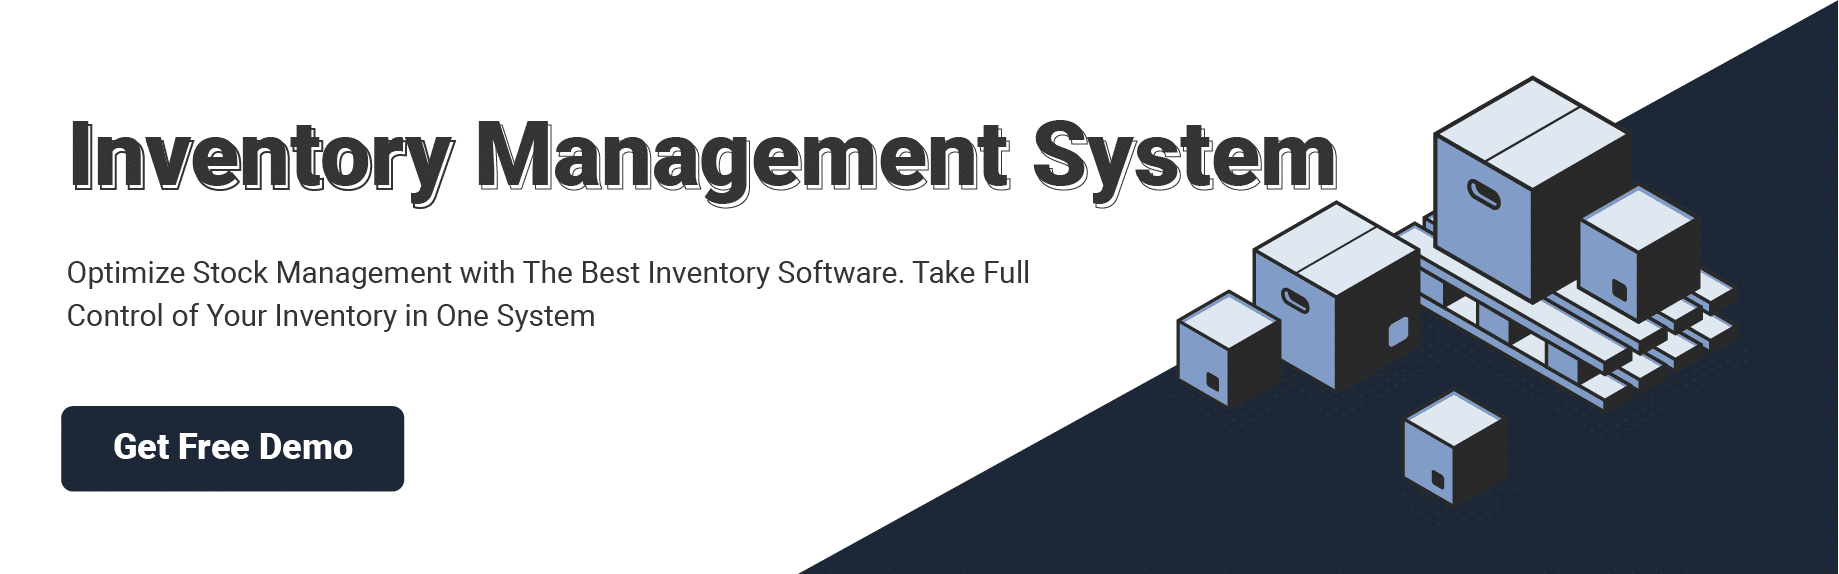 inventory system management